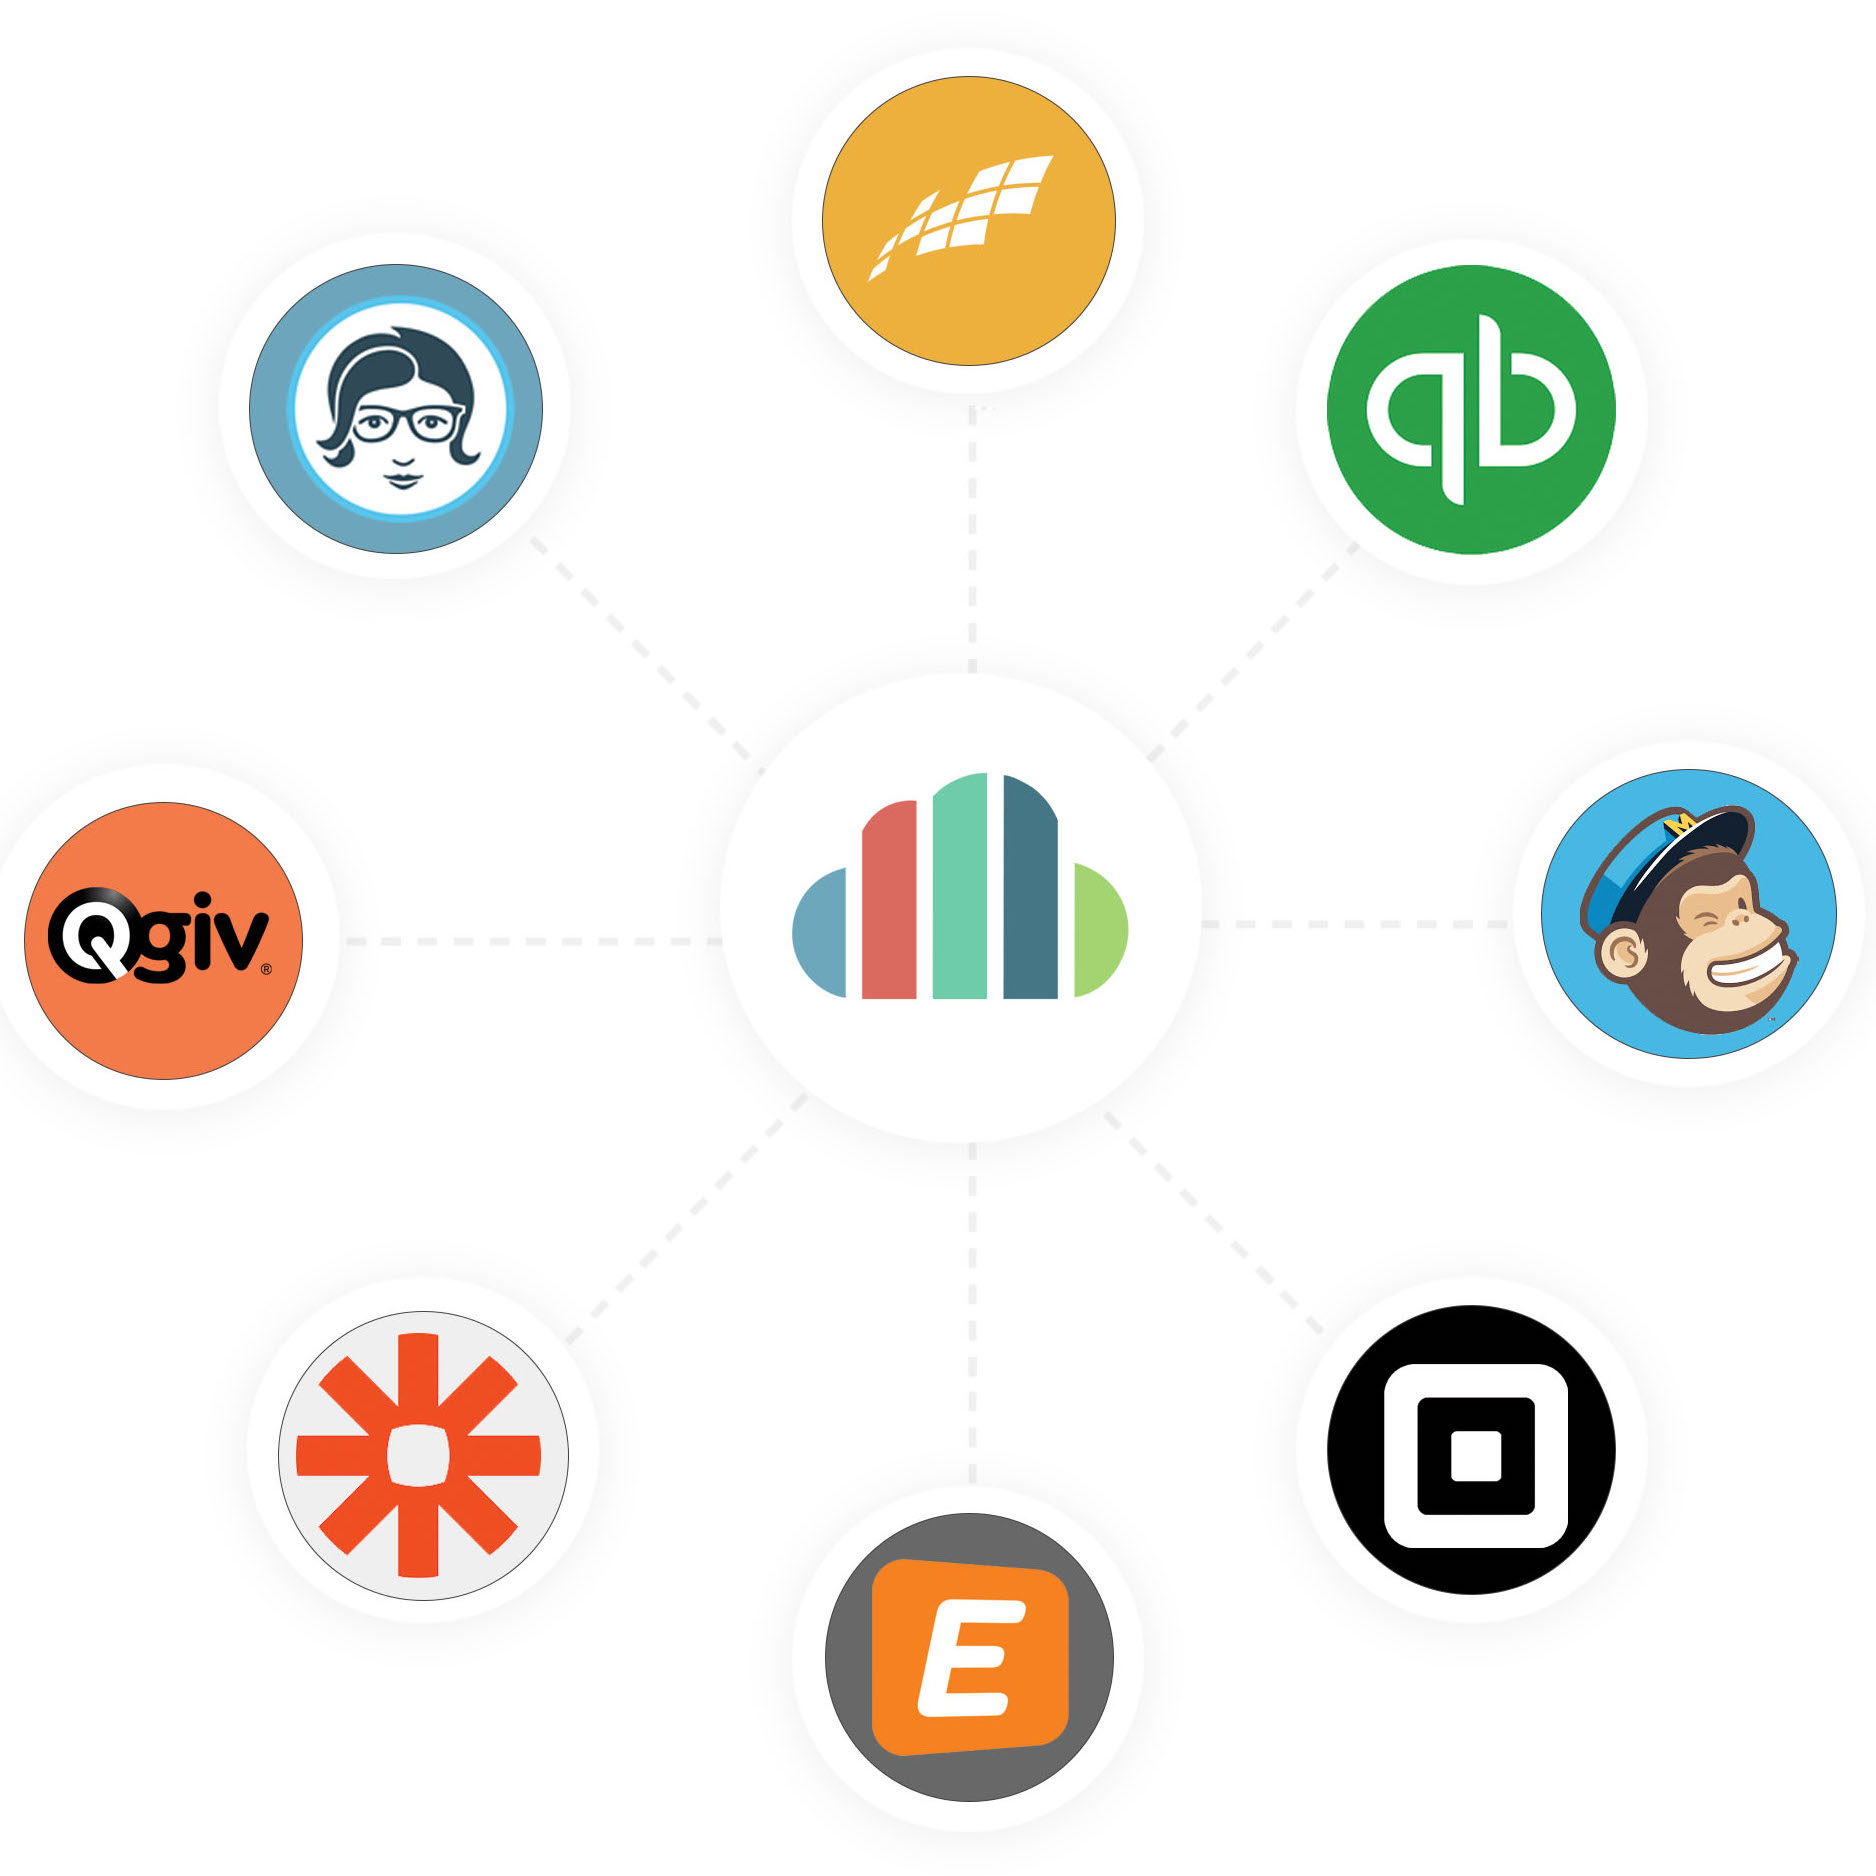 kindful apps and integrations visual